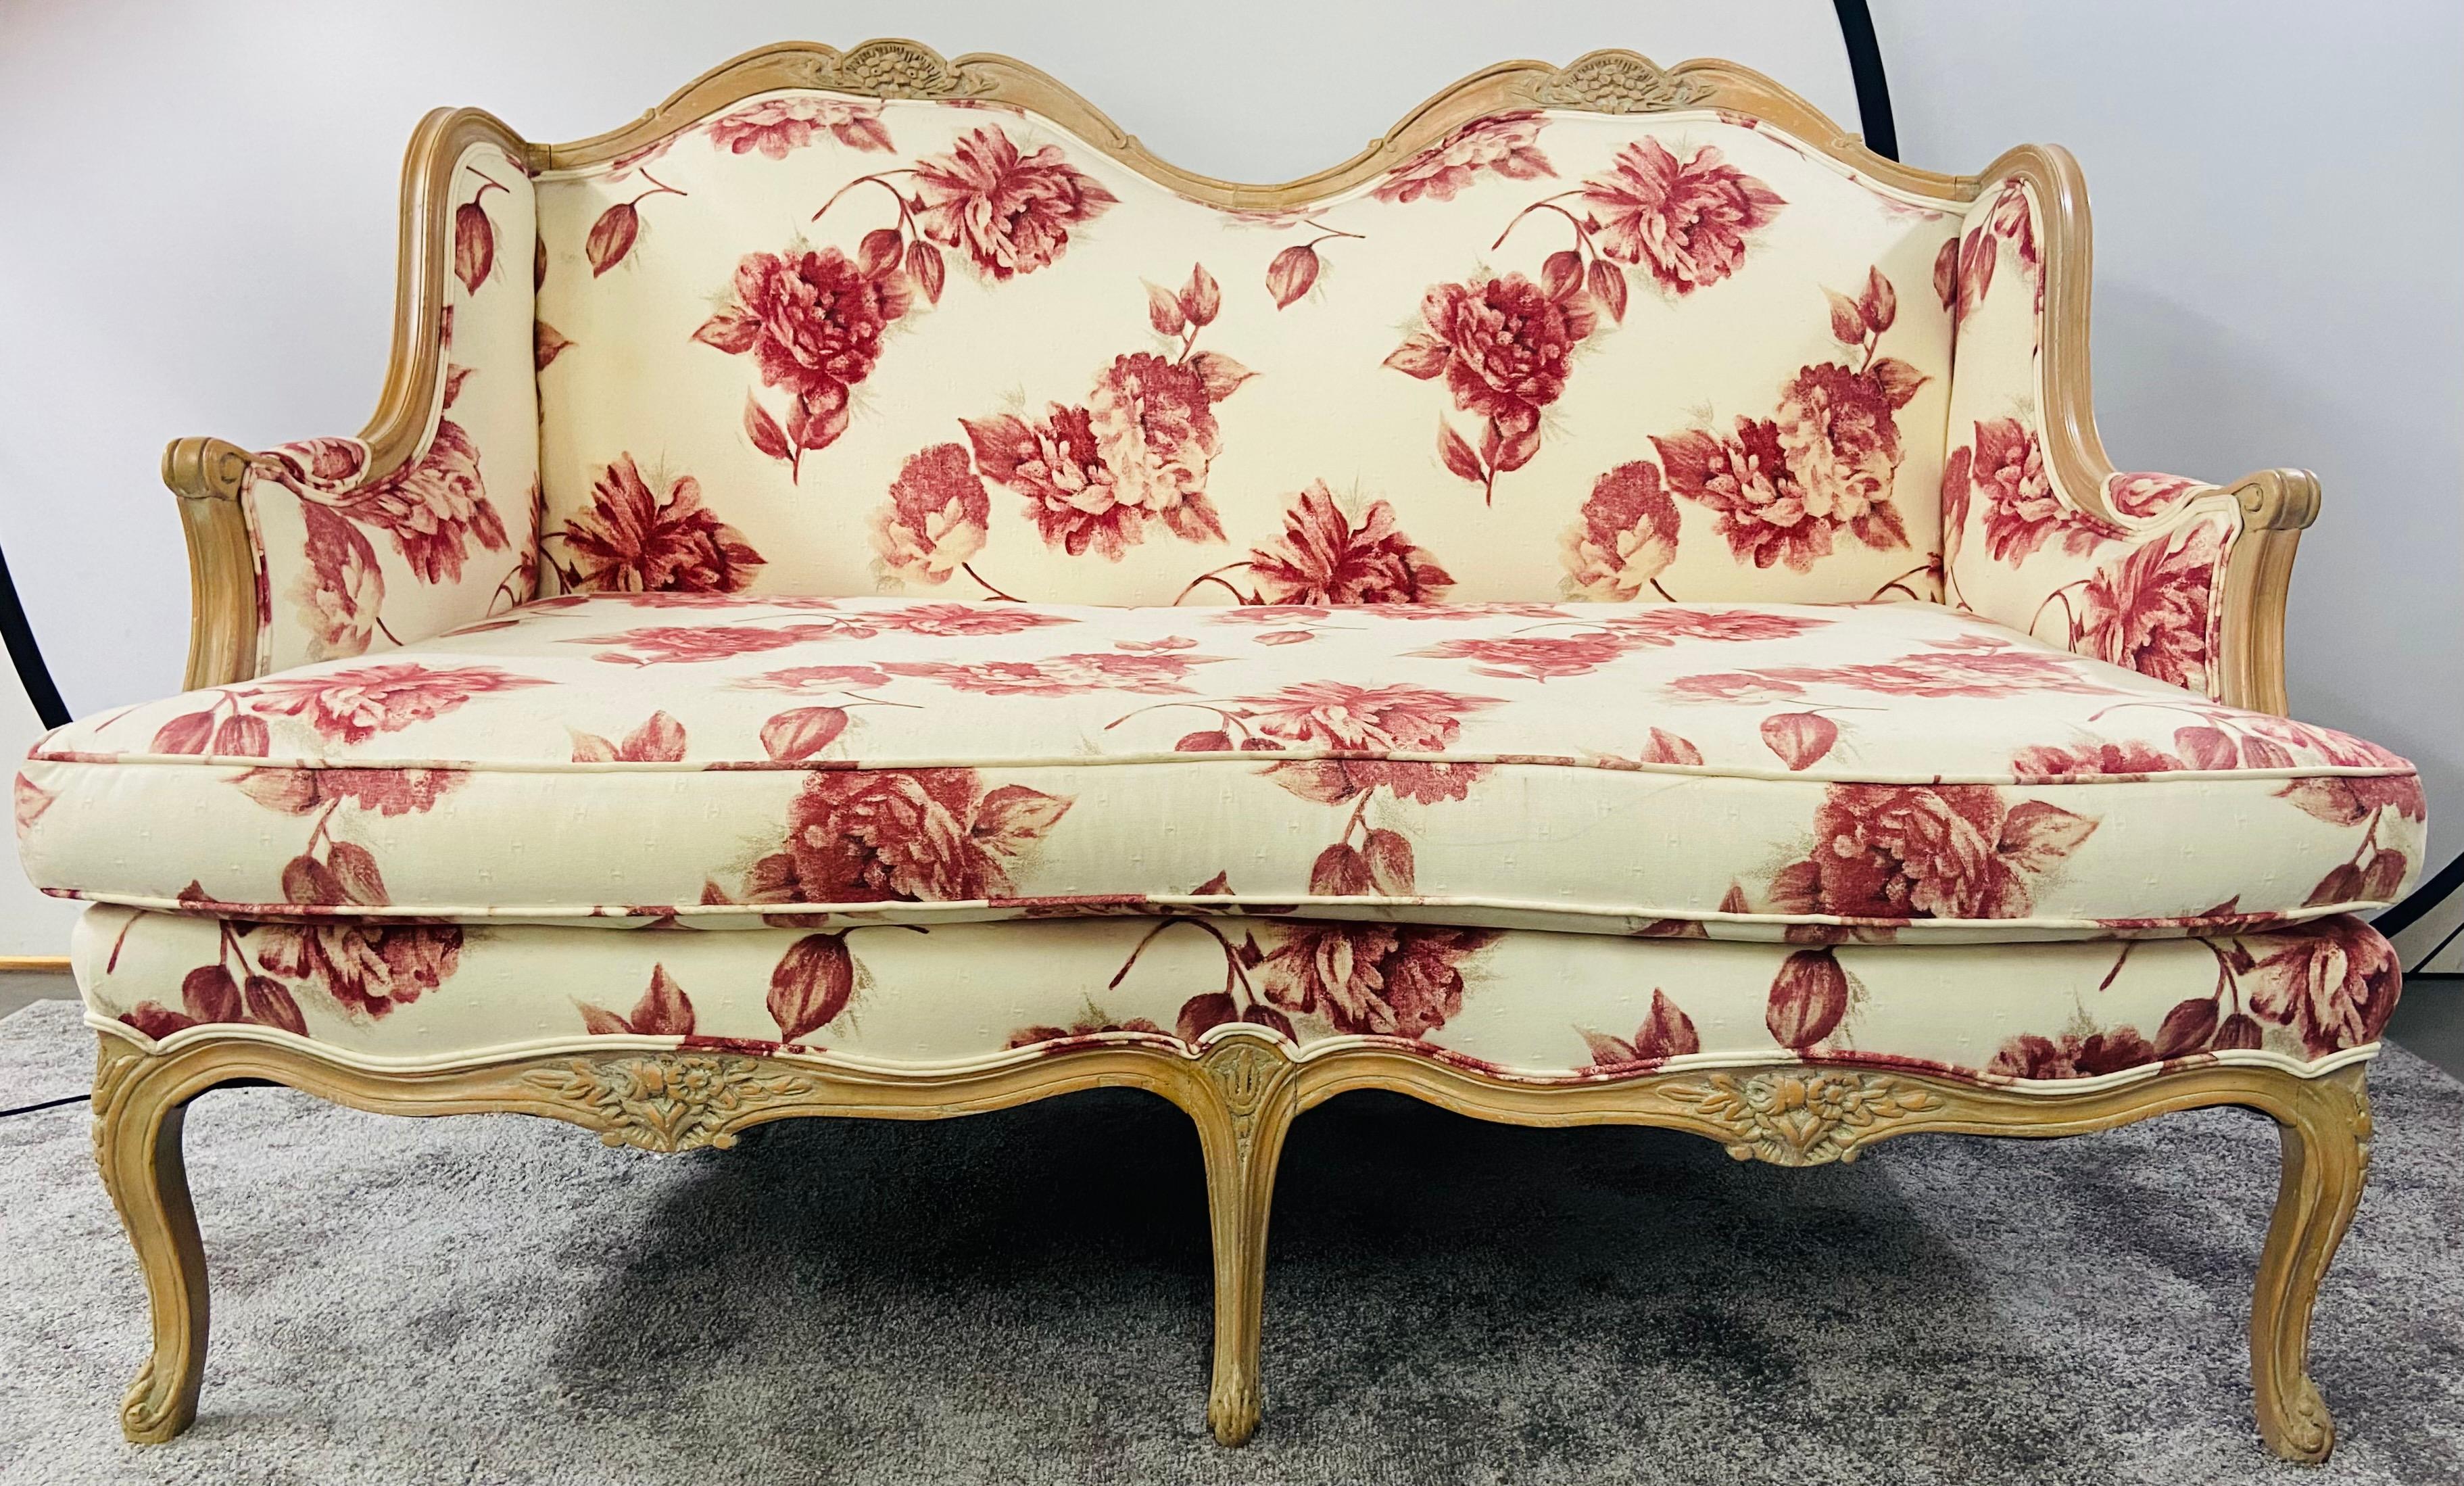 French Louis XV Style Settee or Canape with Floral Upholstery in Red & White For Sale 2